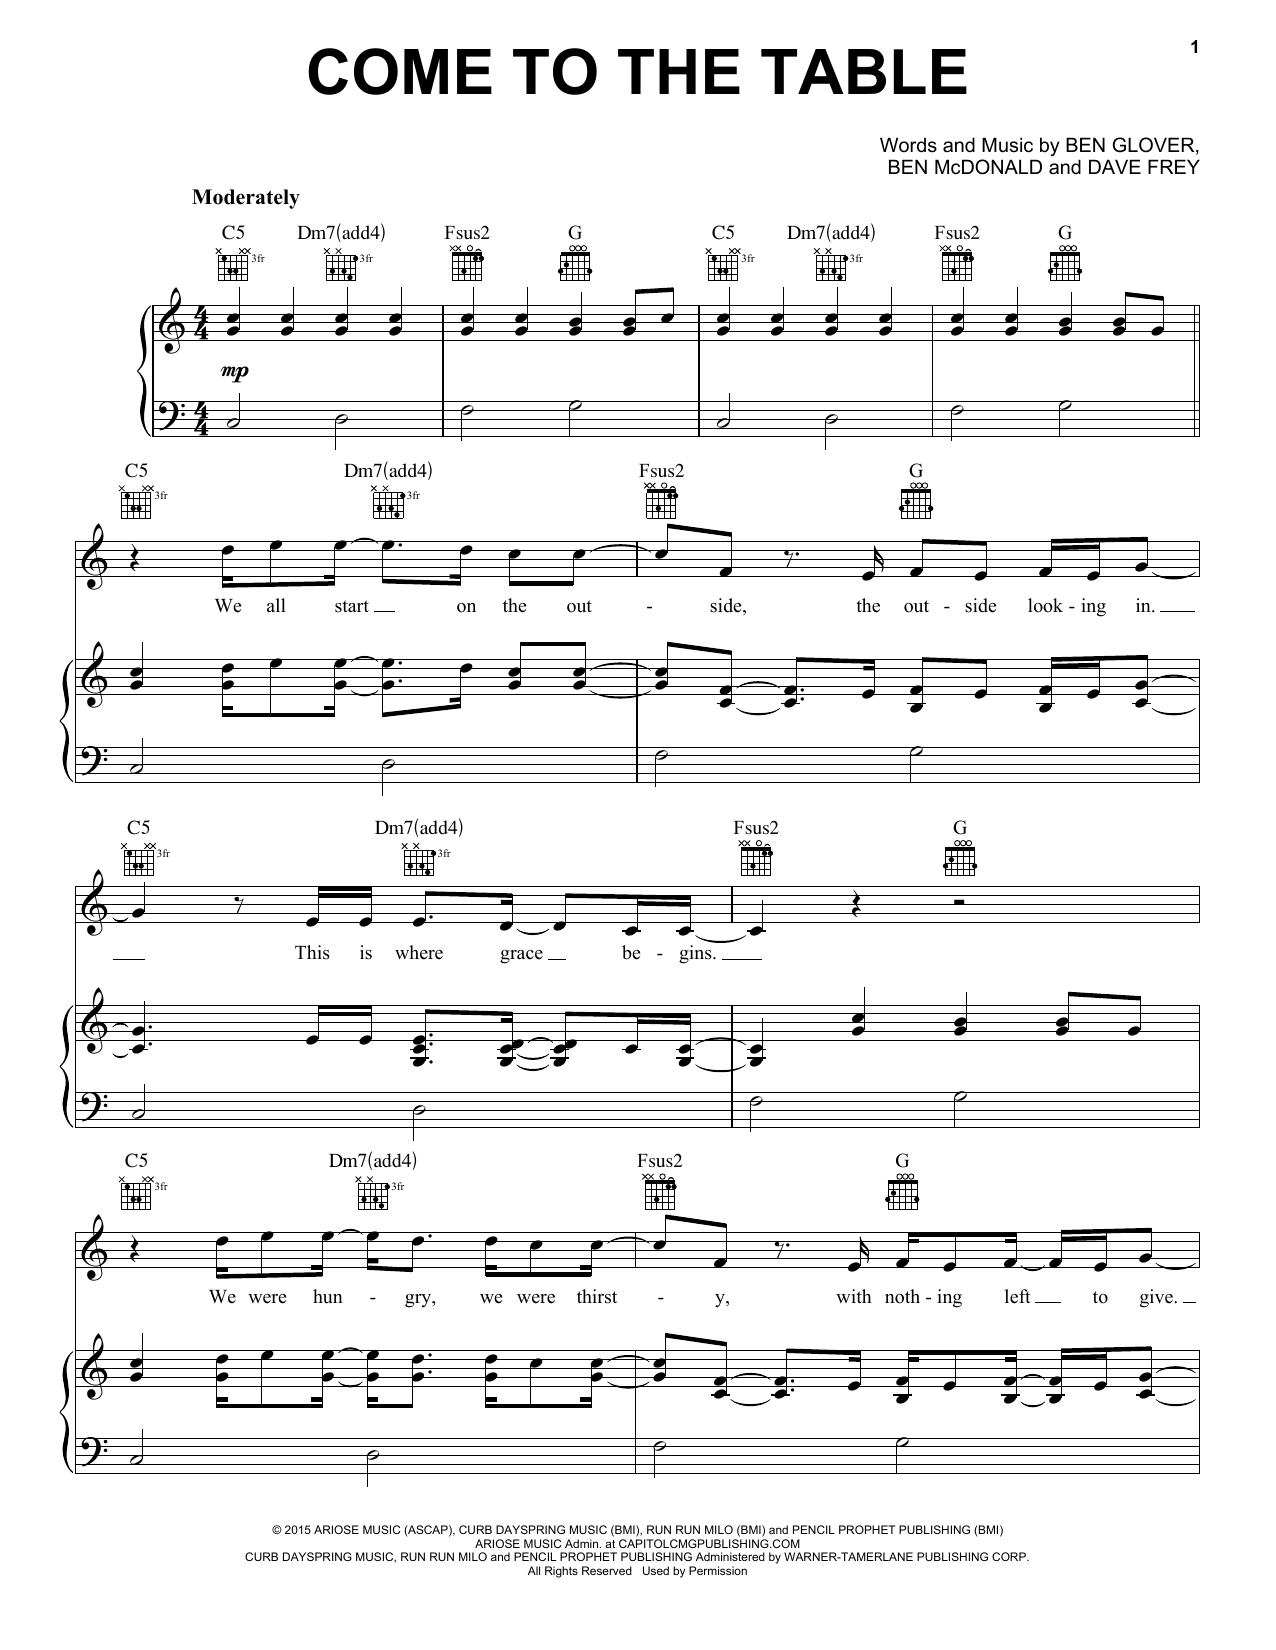 Download Sidewalk Prophets Come To The Table Sheet Music